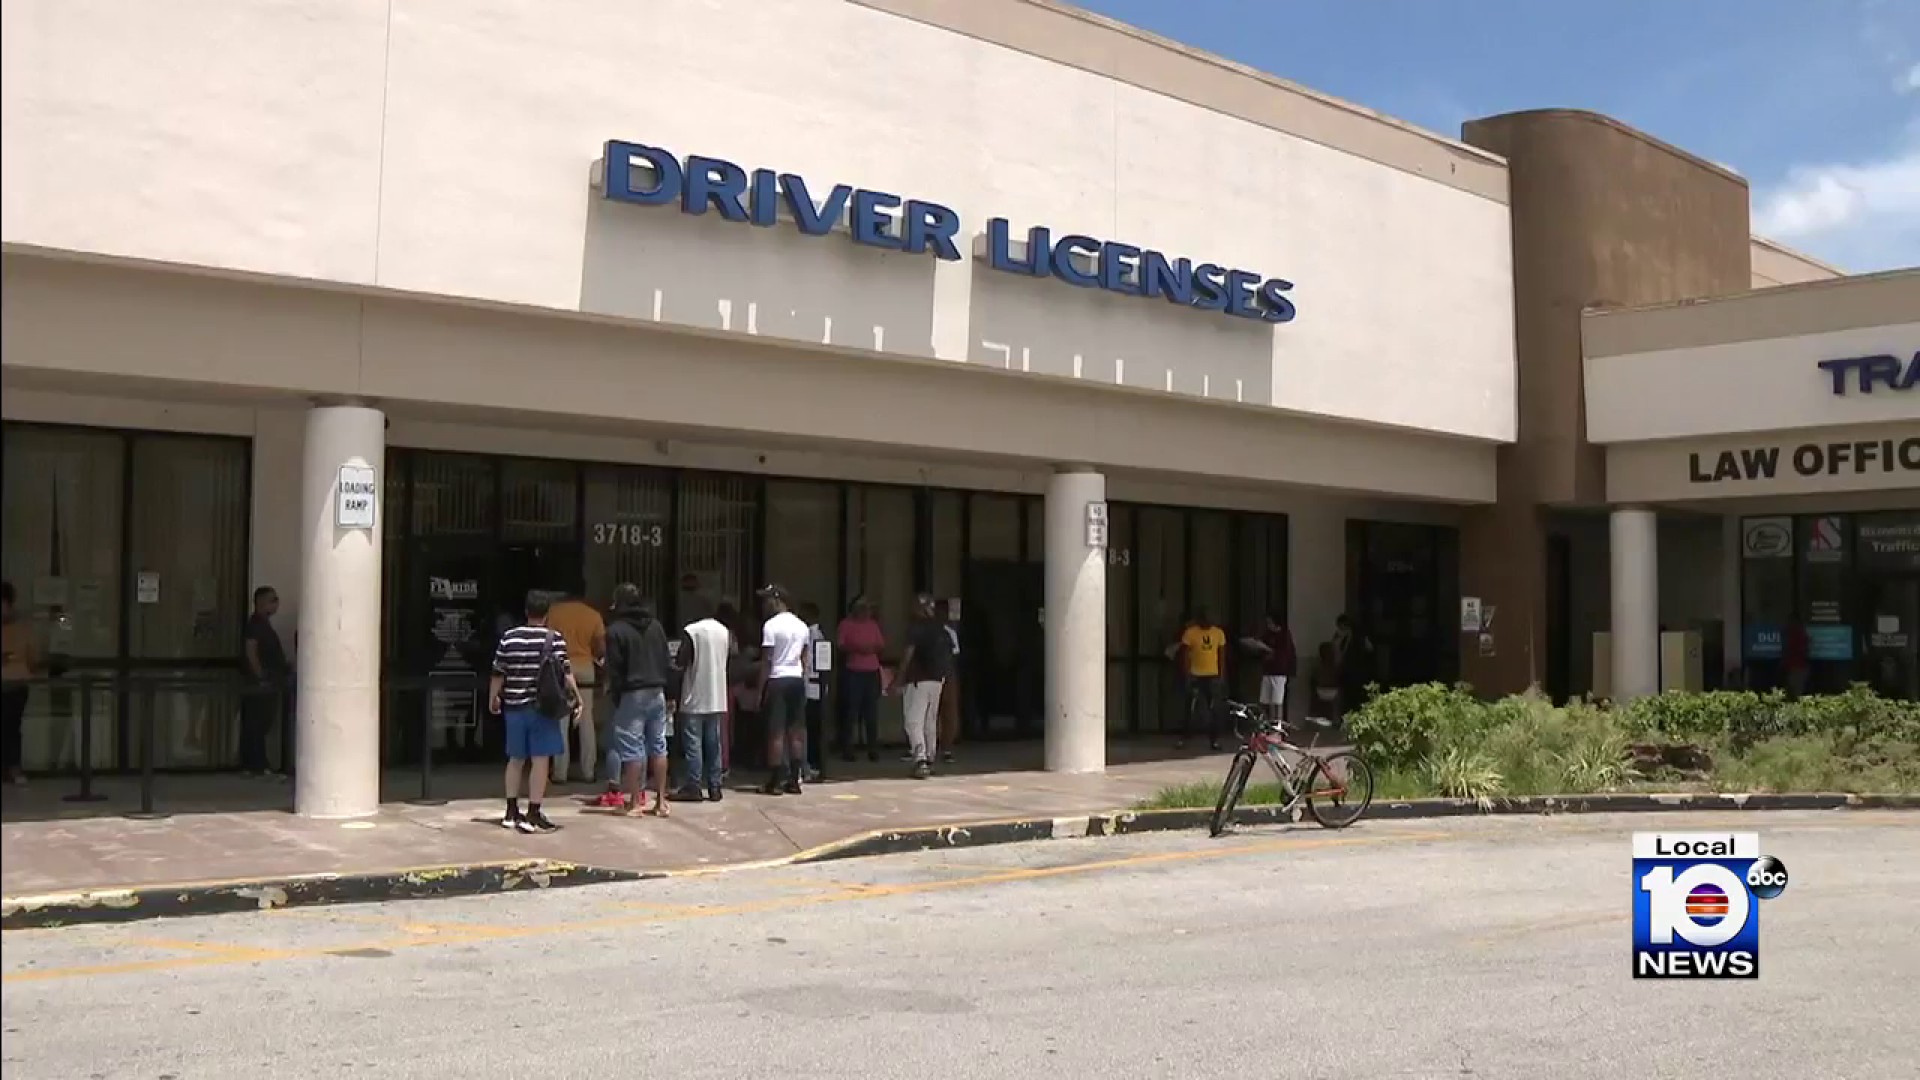 Florida removes two states from banned driver's license list